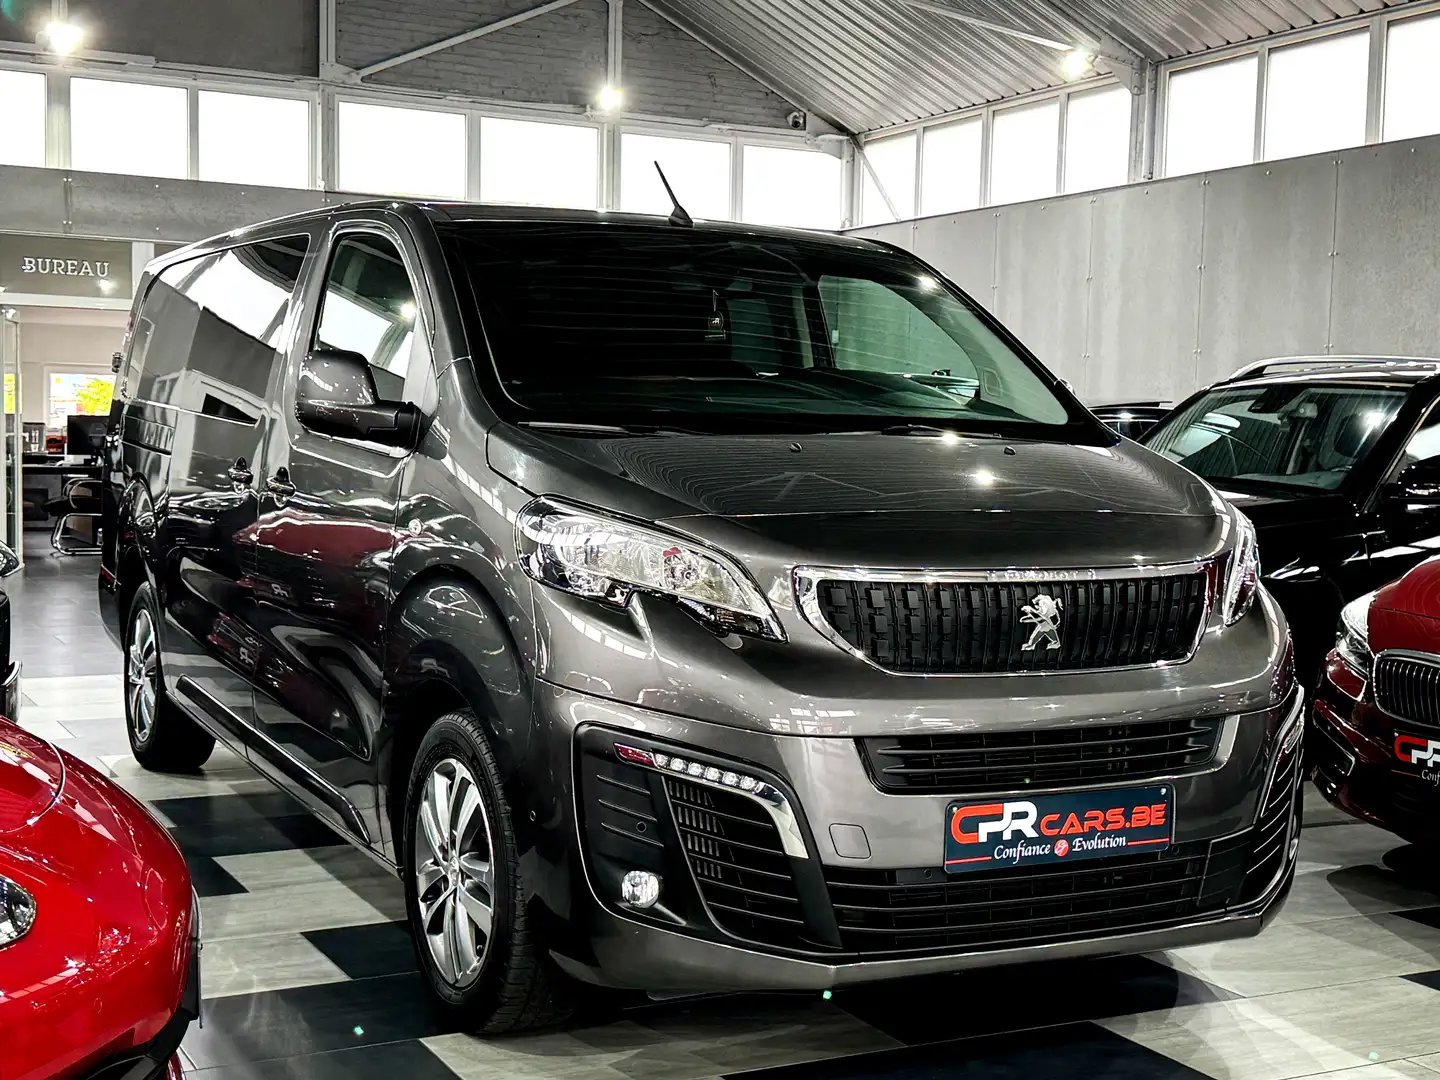 Peugeot Expert 2.0 HDi Double Cab. // RESERVER // RESERVED // Grau - 2